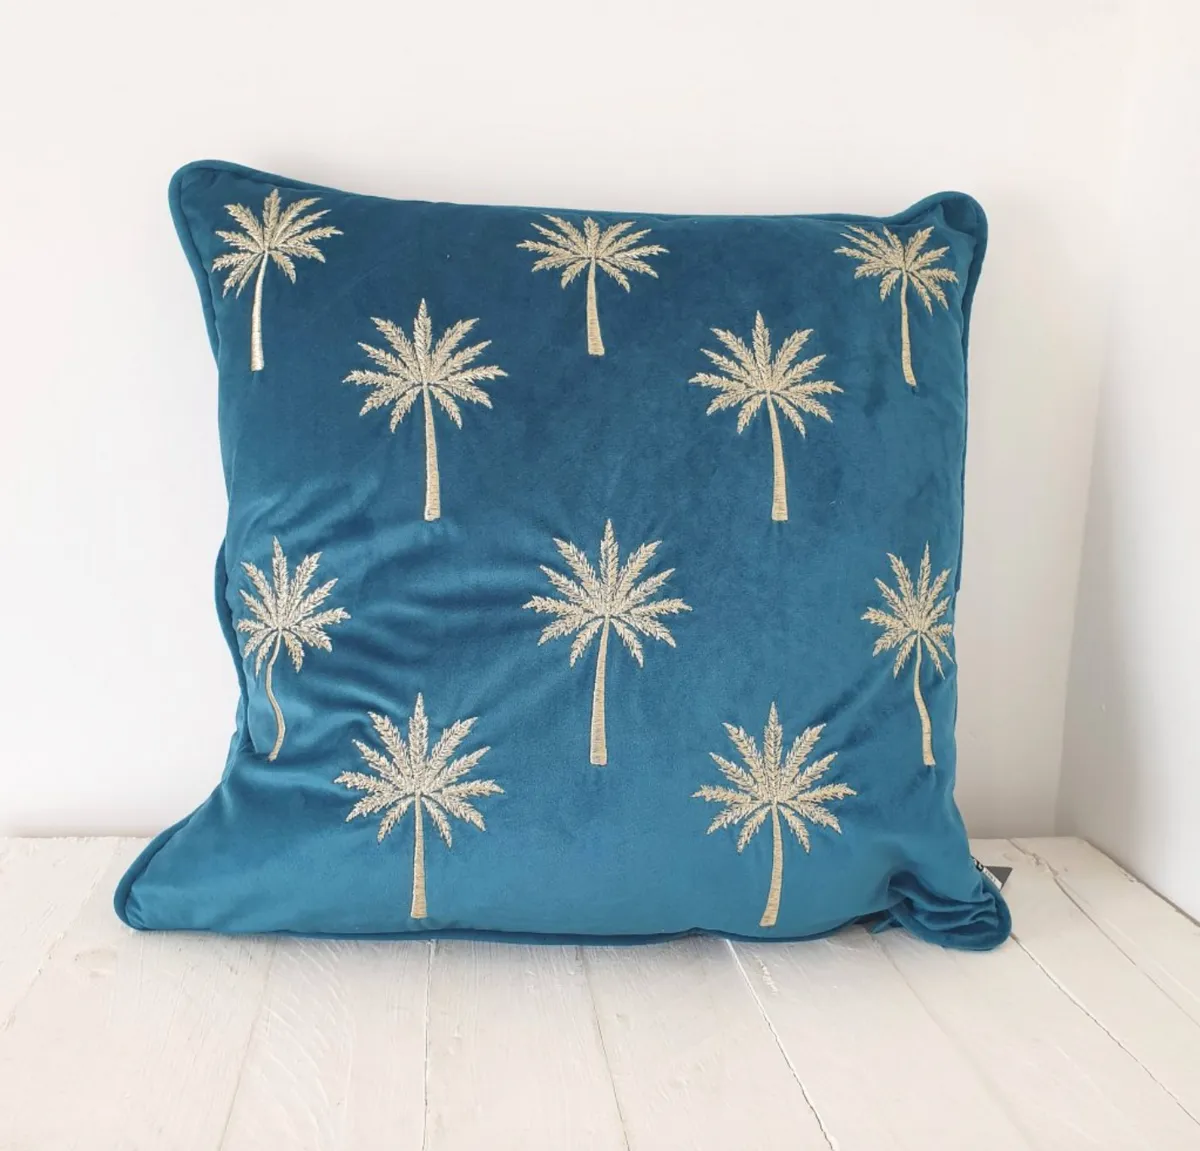 Teal patterned cushion